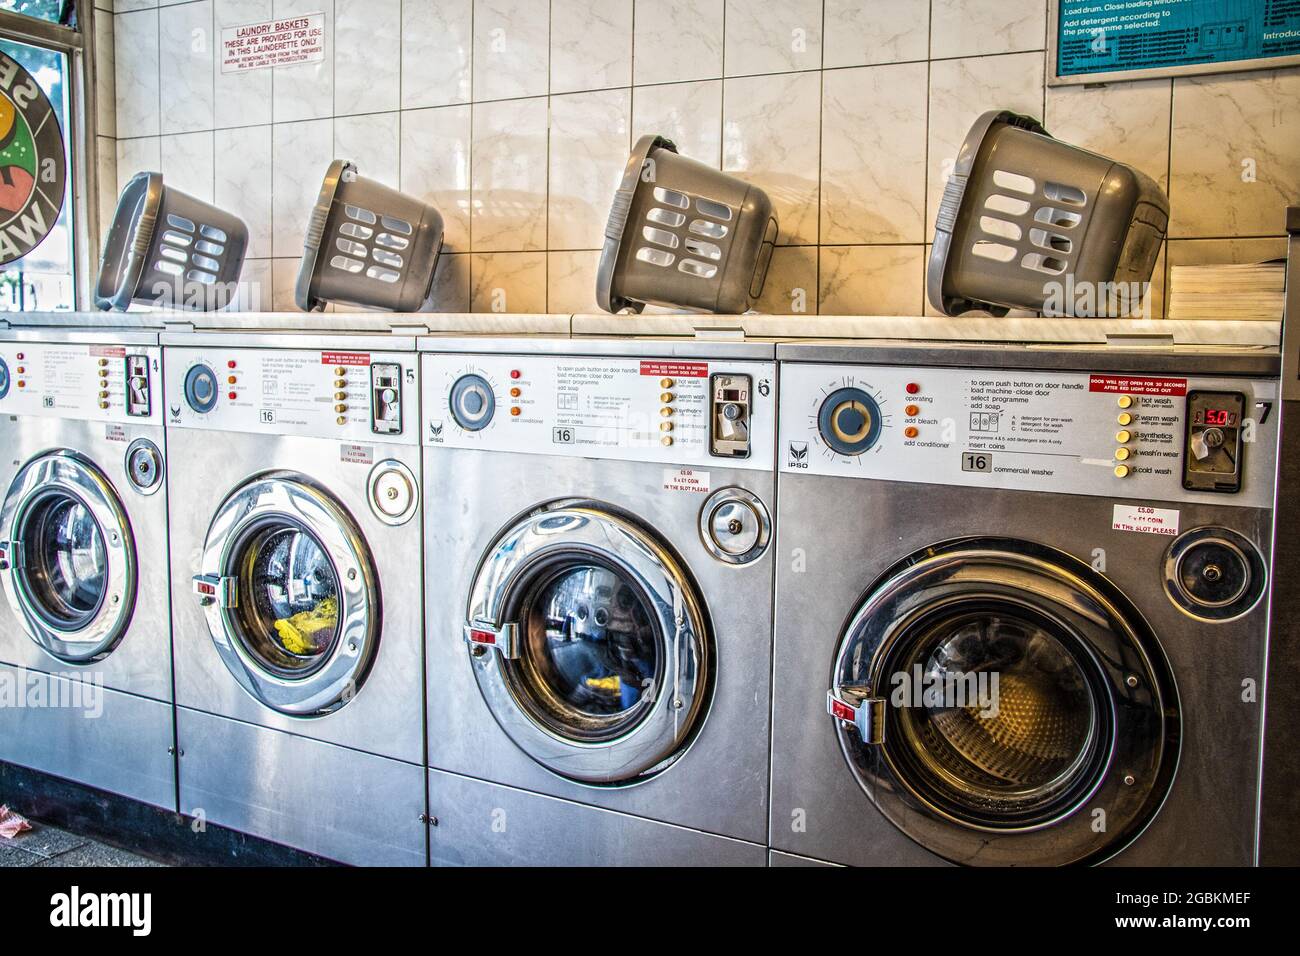 2019 07 23  Laundry or landrette  with coin  operated front loading washing machines and landry baskets on top Stock Photo